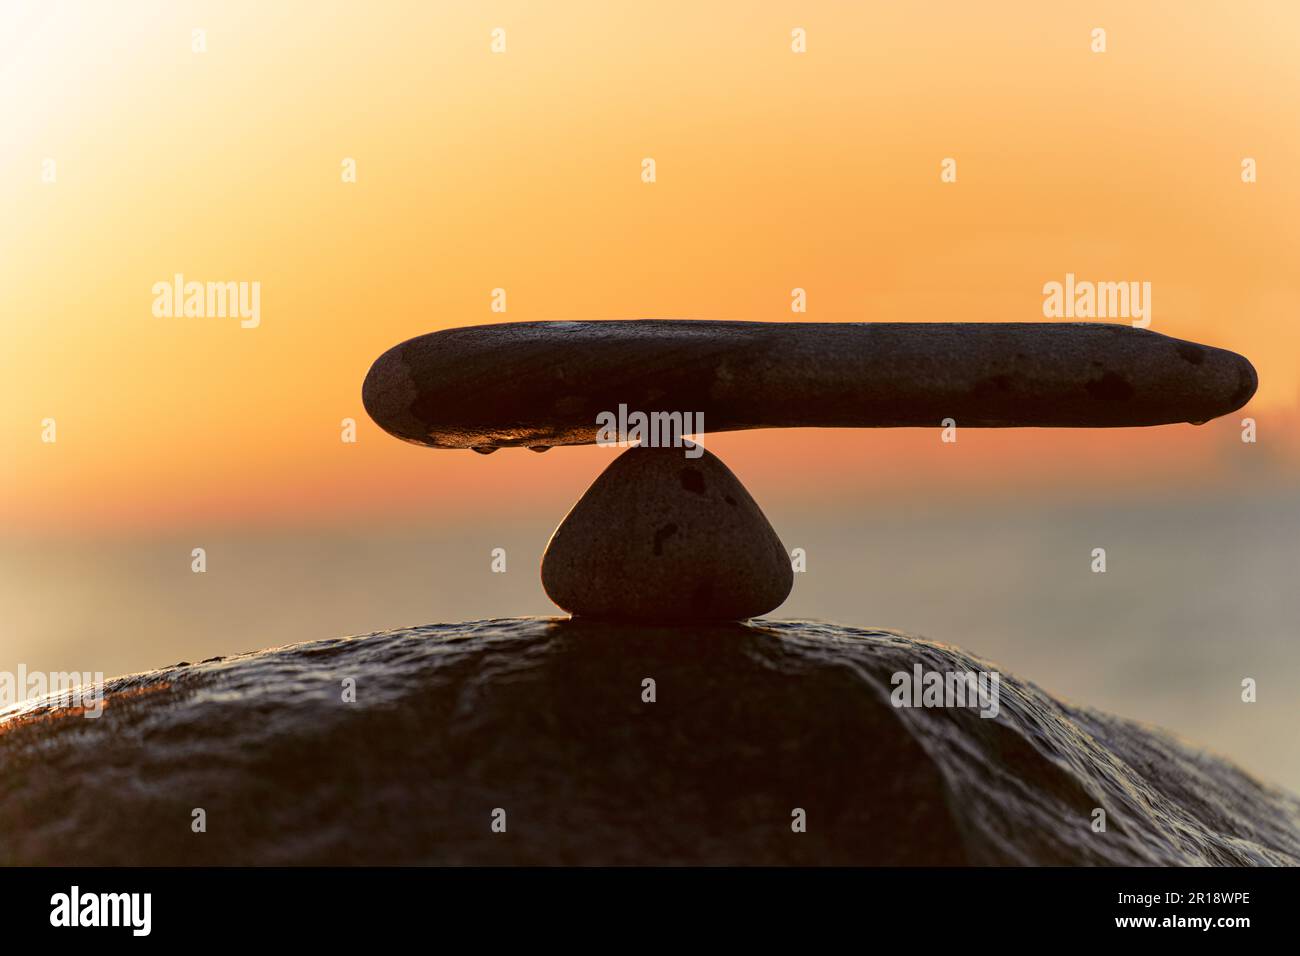 in the balance of power - natural scales of stones by the sea to the orange sunset - symbol photo Stock Photo